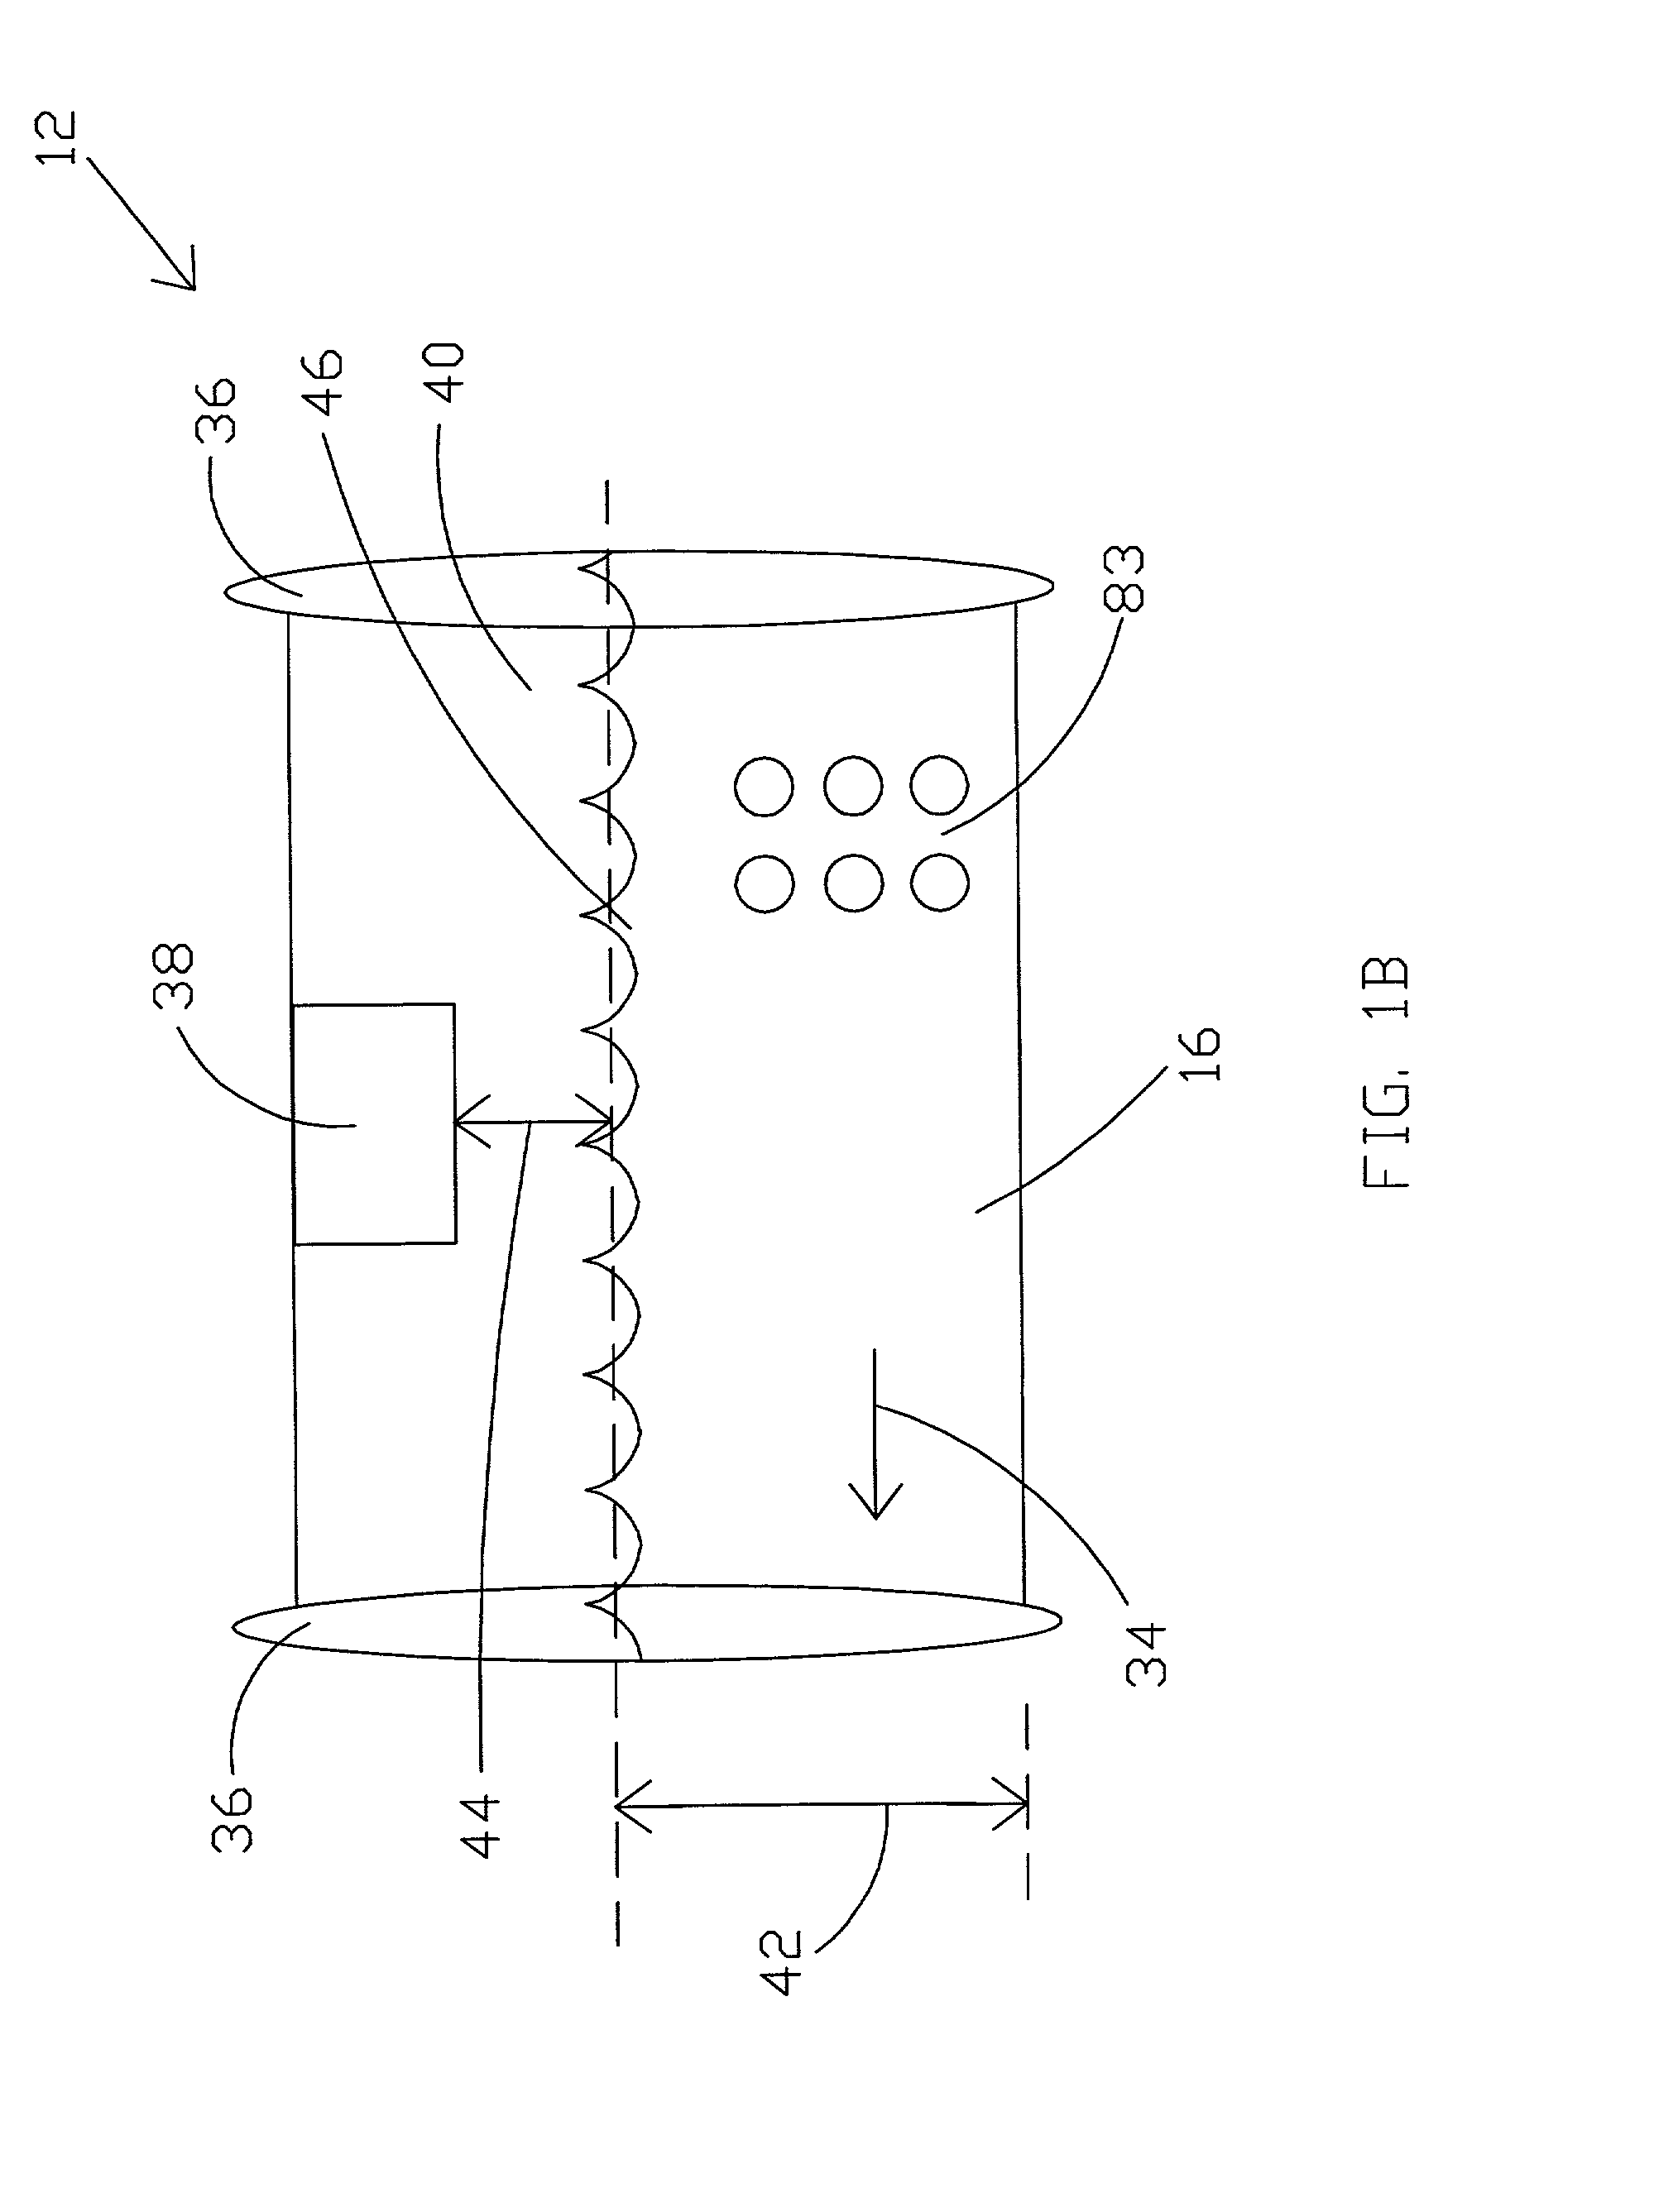 Measurment system and method